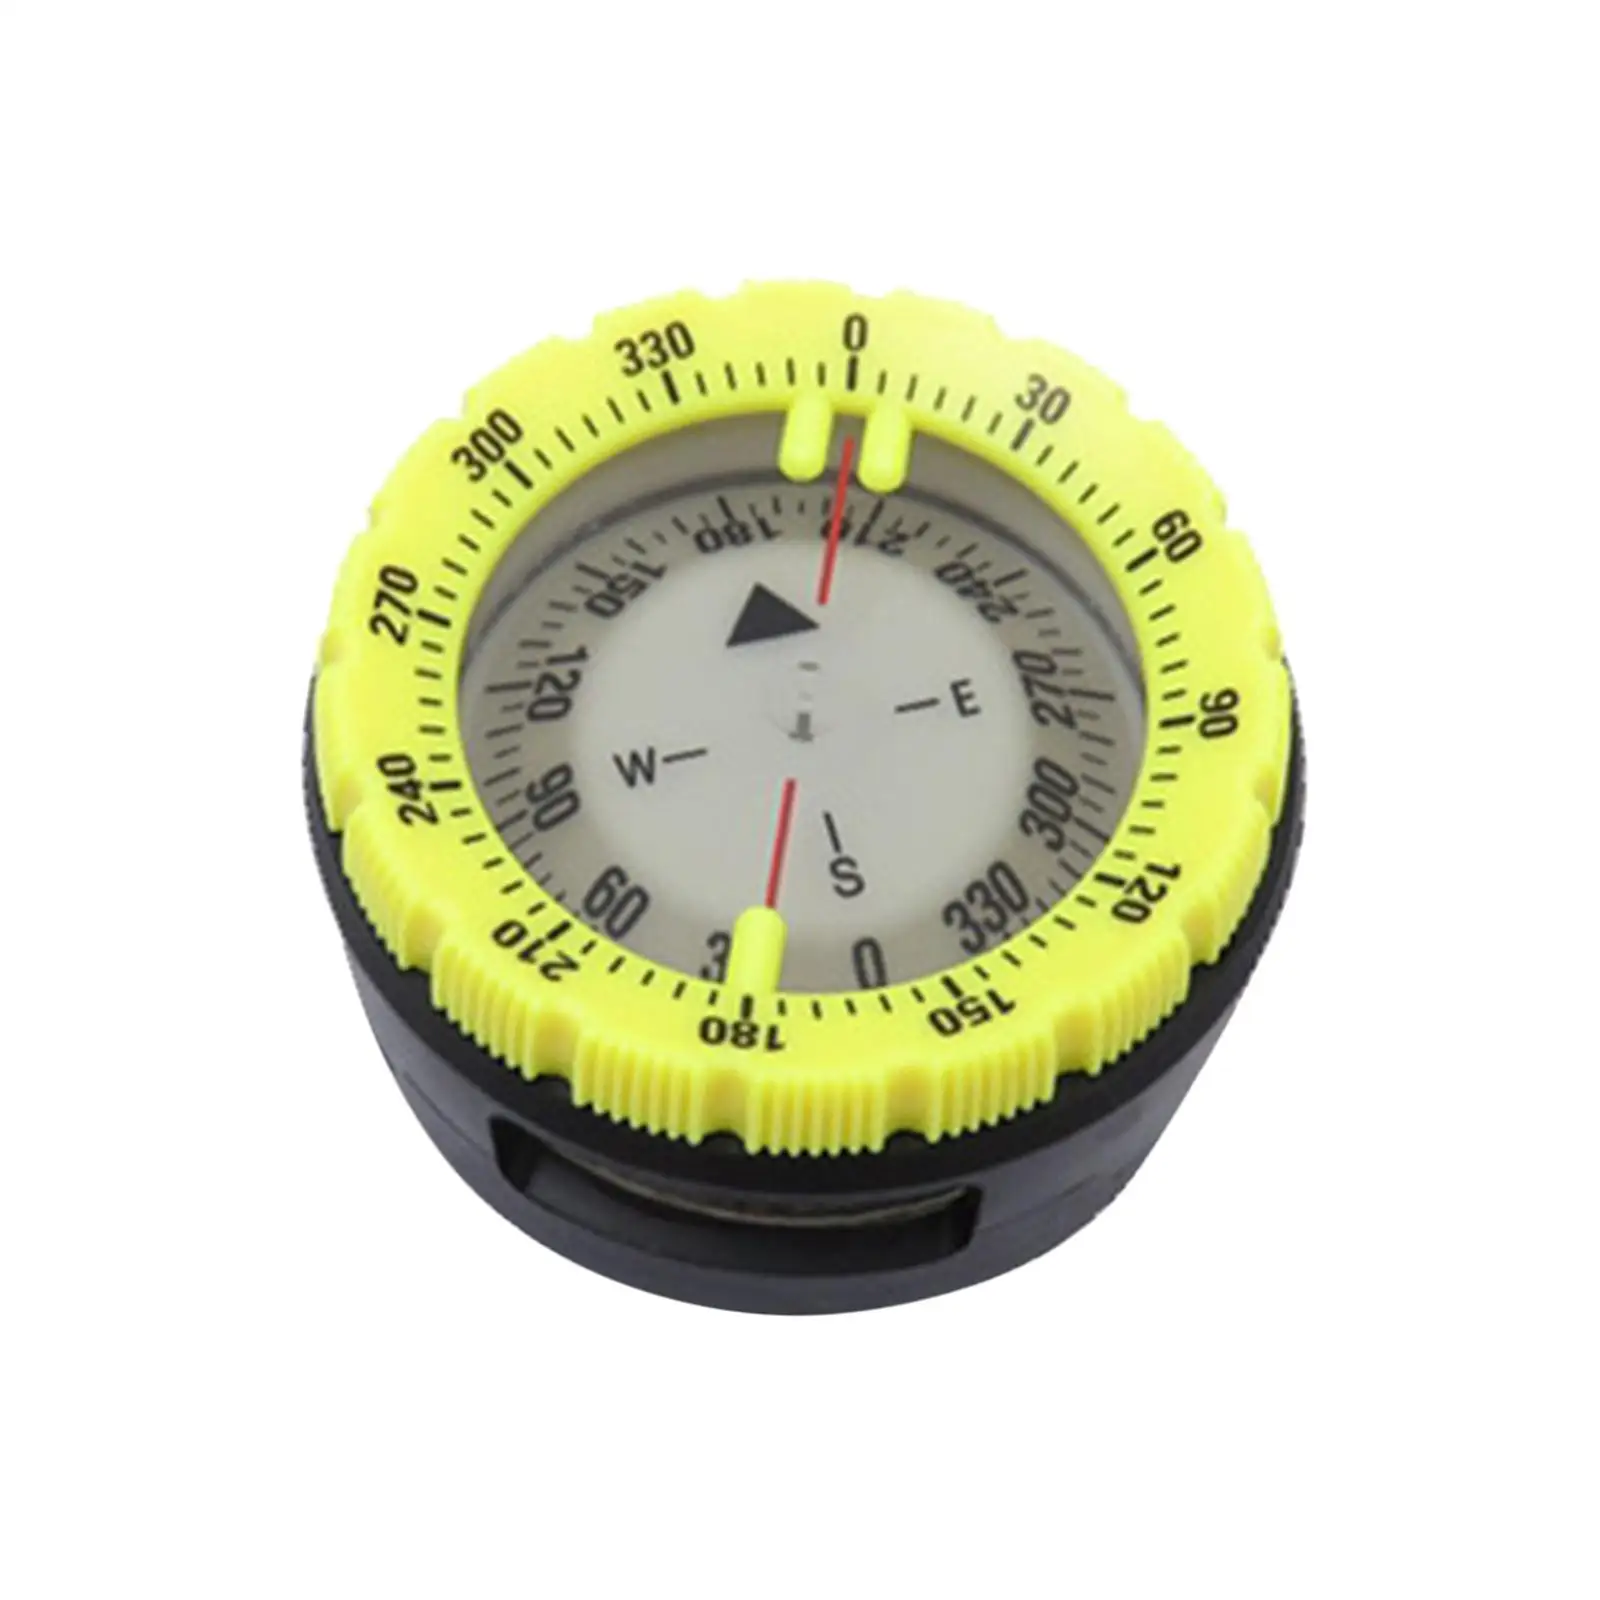 Camping Survival Compass Pocket Compass for Orienteering Outdoor Backpacking